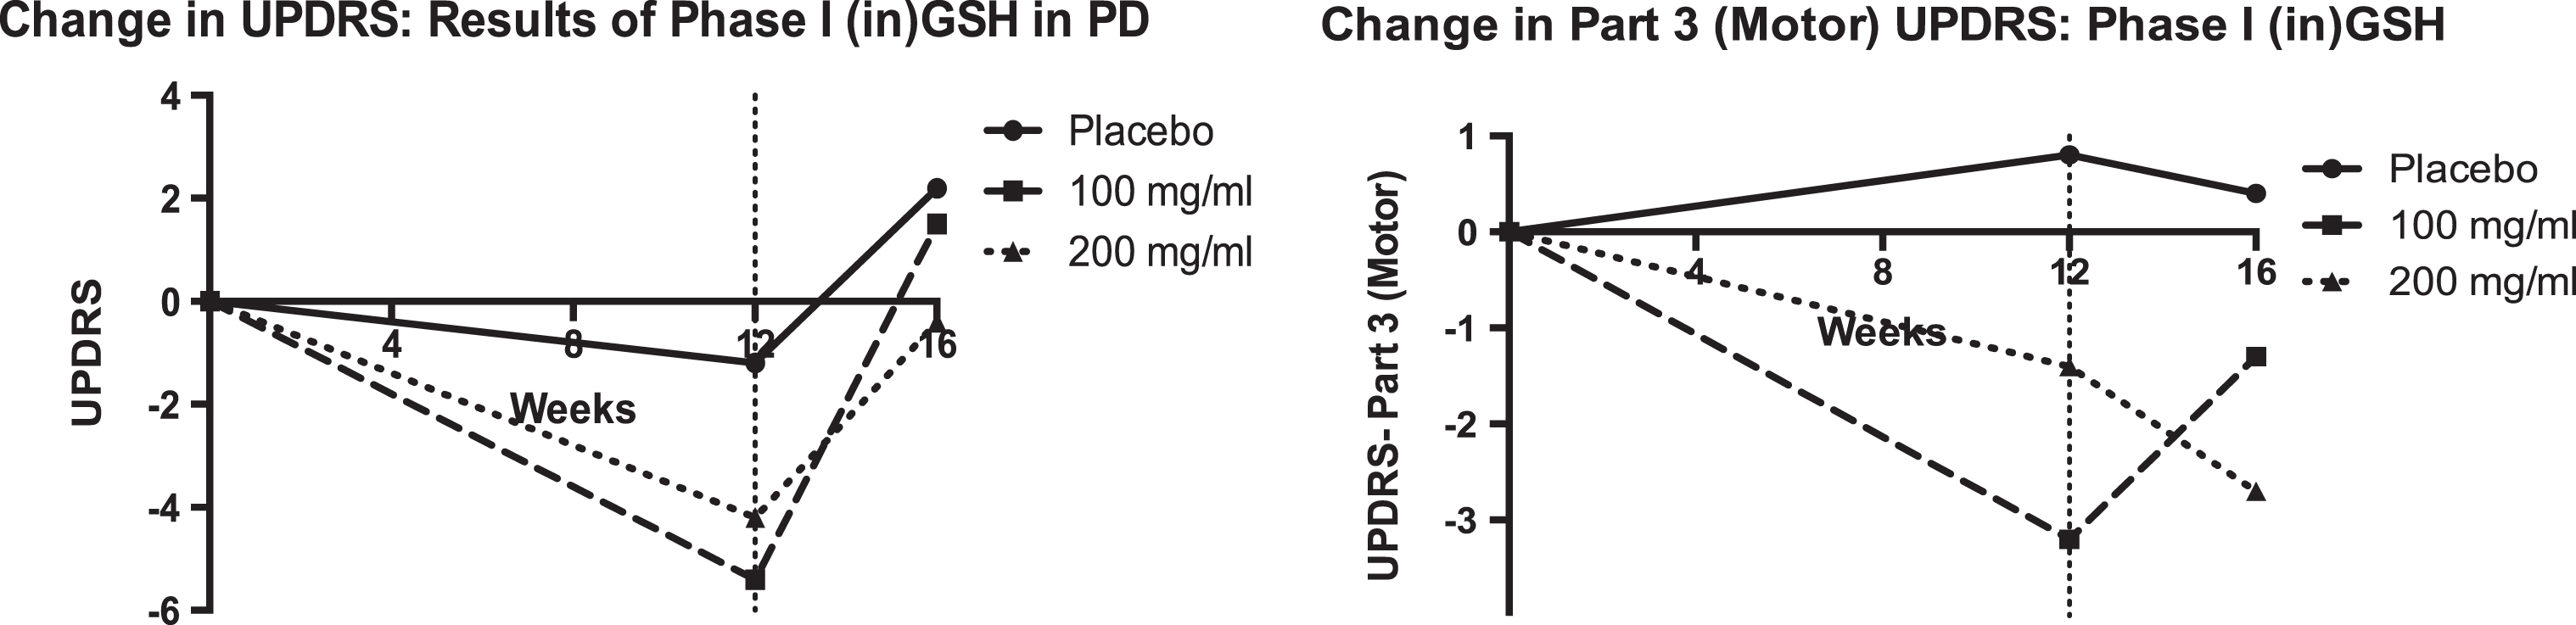 Results demonstrating improvement in clinical measures of PD severity from the Phase I/IIa Study of (in) GSH in PD. The goal of this Phase IIb study was to determine whether these results were reproducible. All study medications were given thrice daily, e.g. 100 mg/ml is equal to 300 mg/ day. Data were re-plotted from [15].